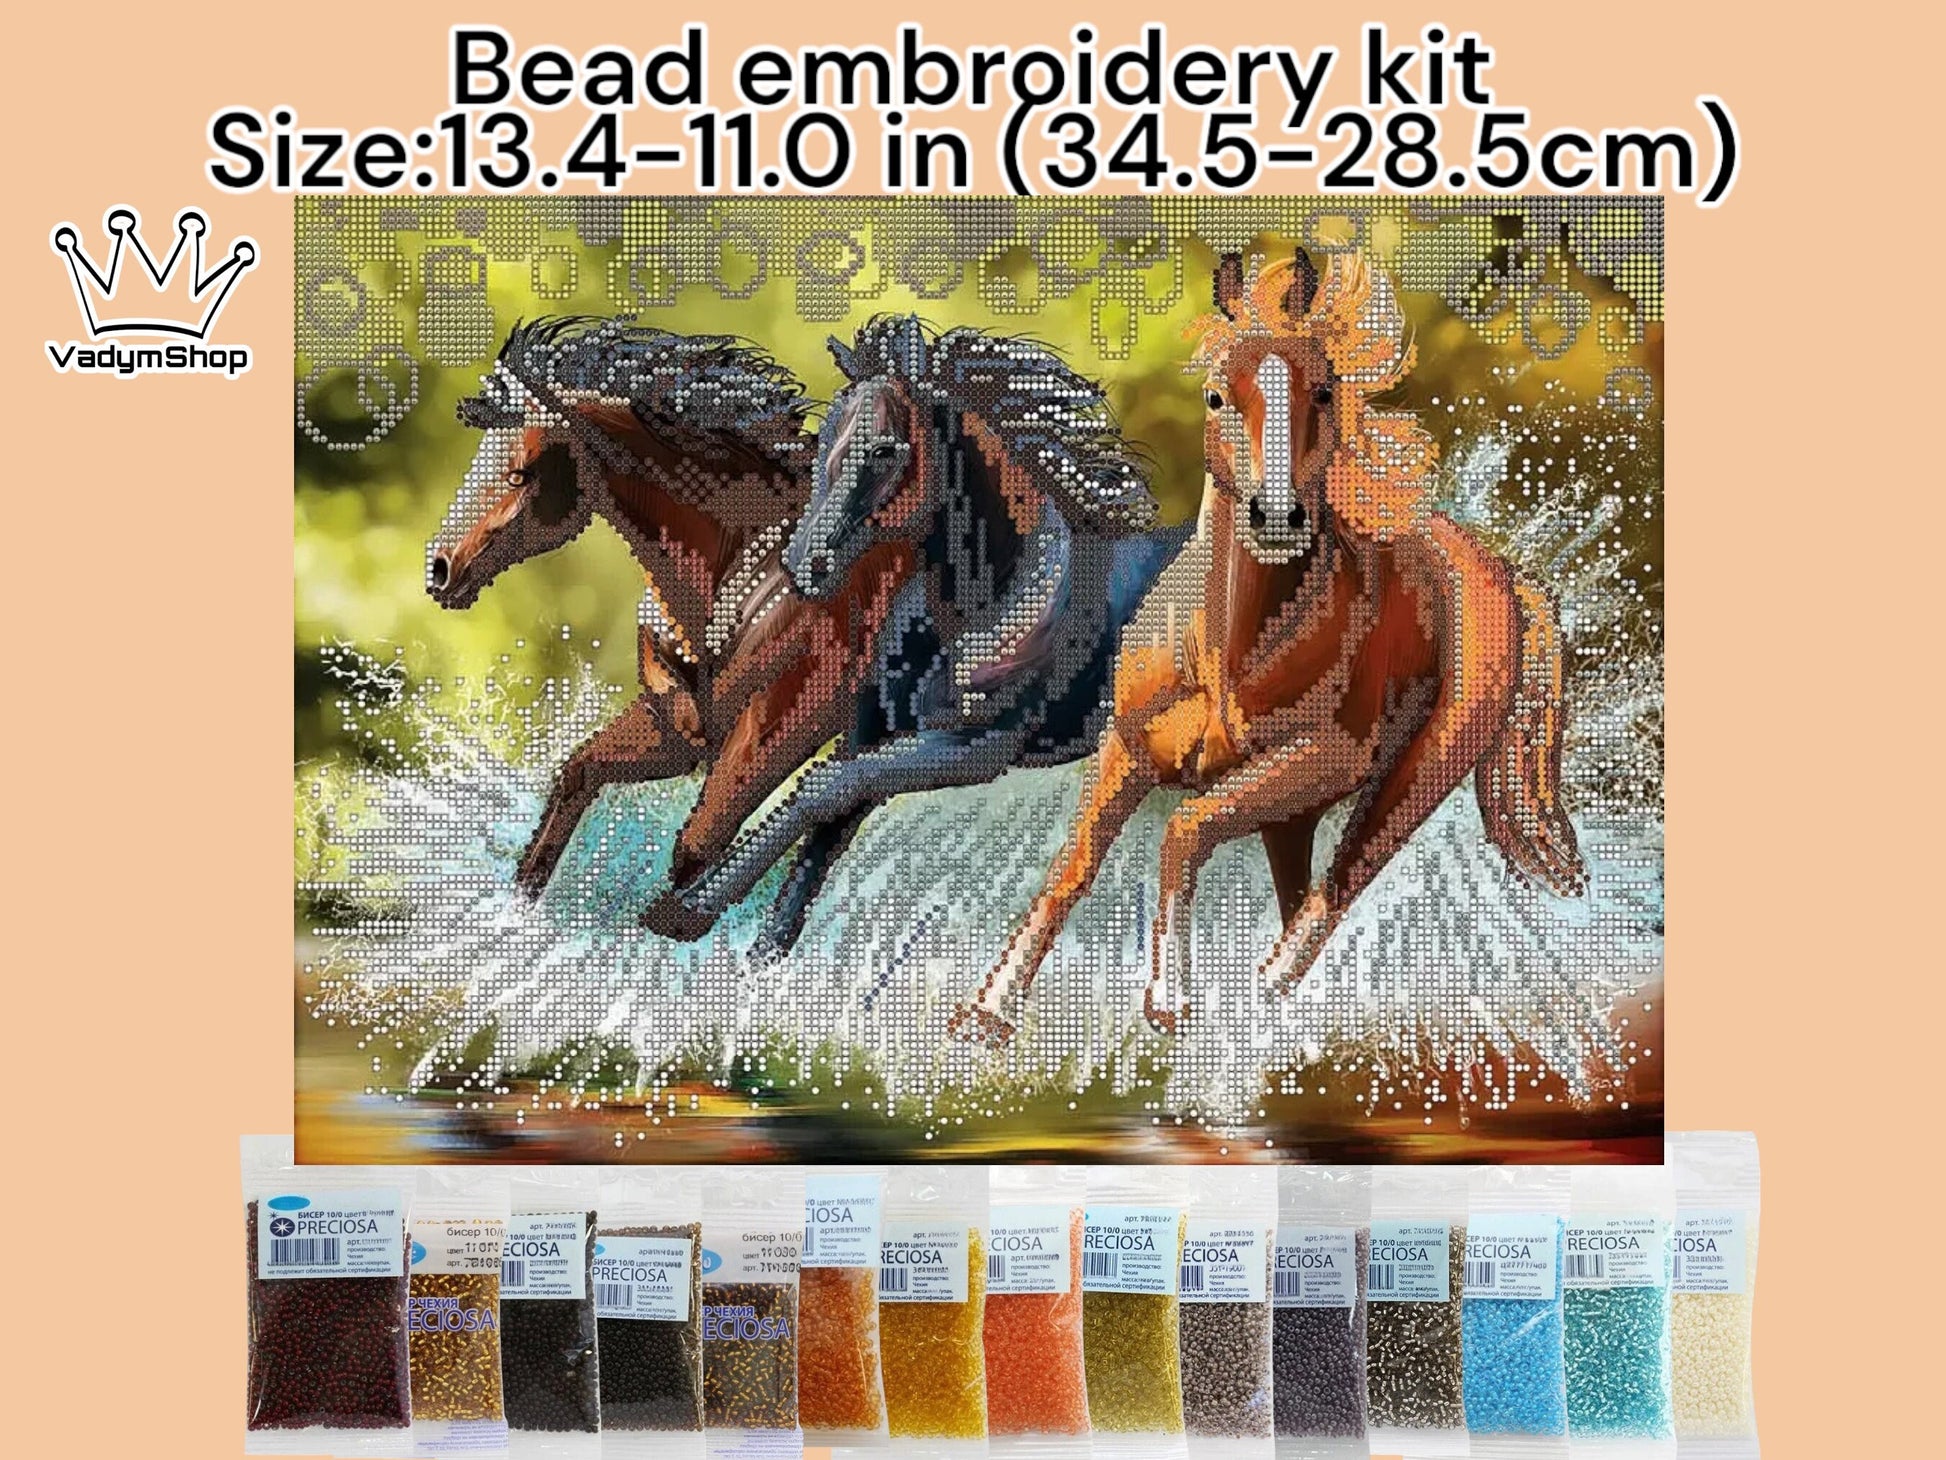 Stunning DIY Bead Embroidery Kit - Horses Mustangs Design Size: 13.4-11.0 in (34.5-28.5cm) - VadymShop